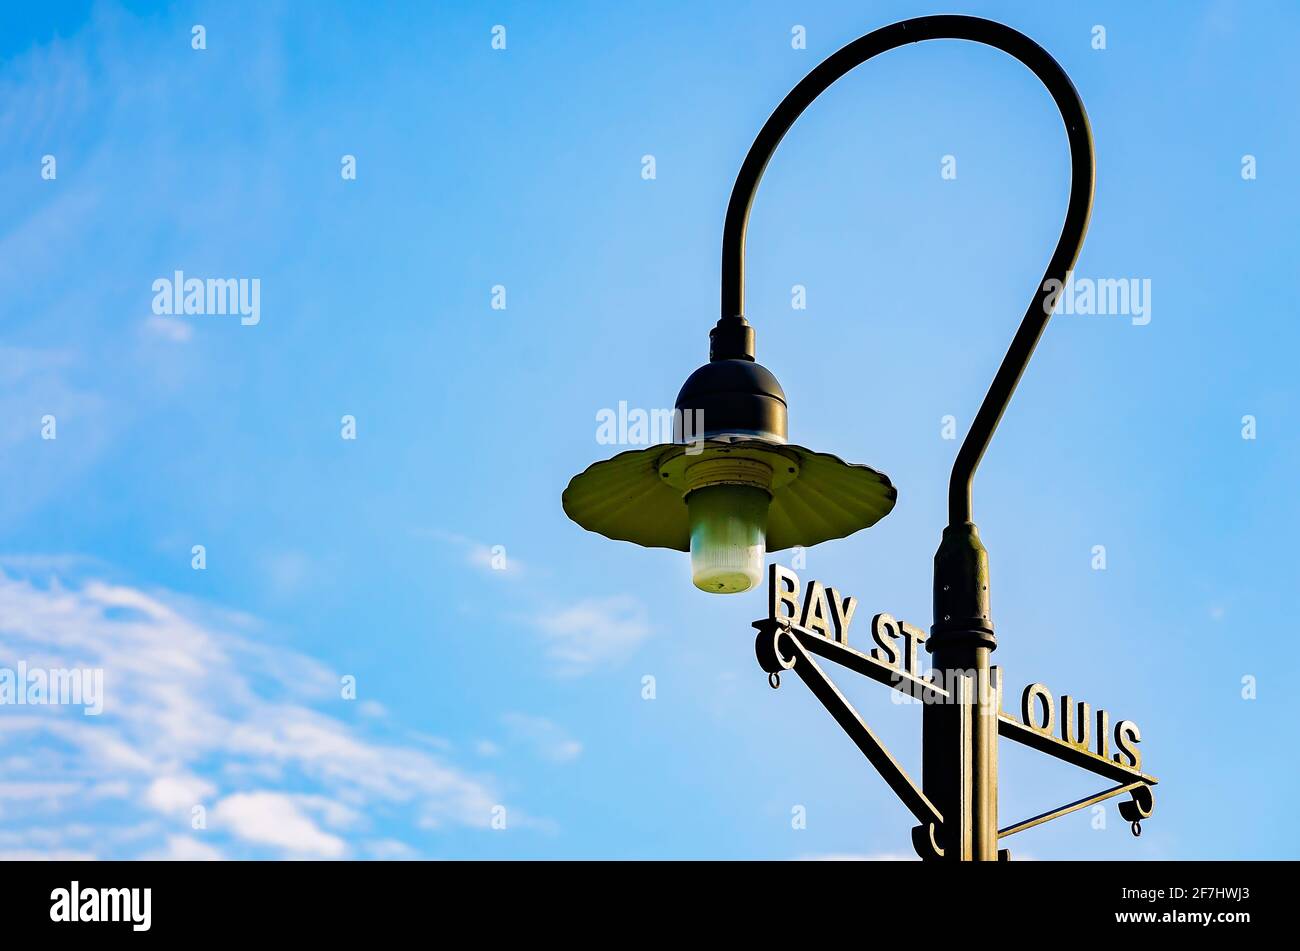 An old-fashioned street lamp stands in downtown Bay St. Louis, April 3, 2021, in Bay Saint Louis, Mississippi. Stock Photo